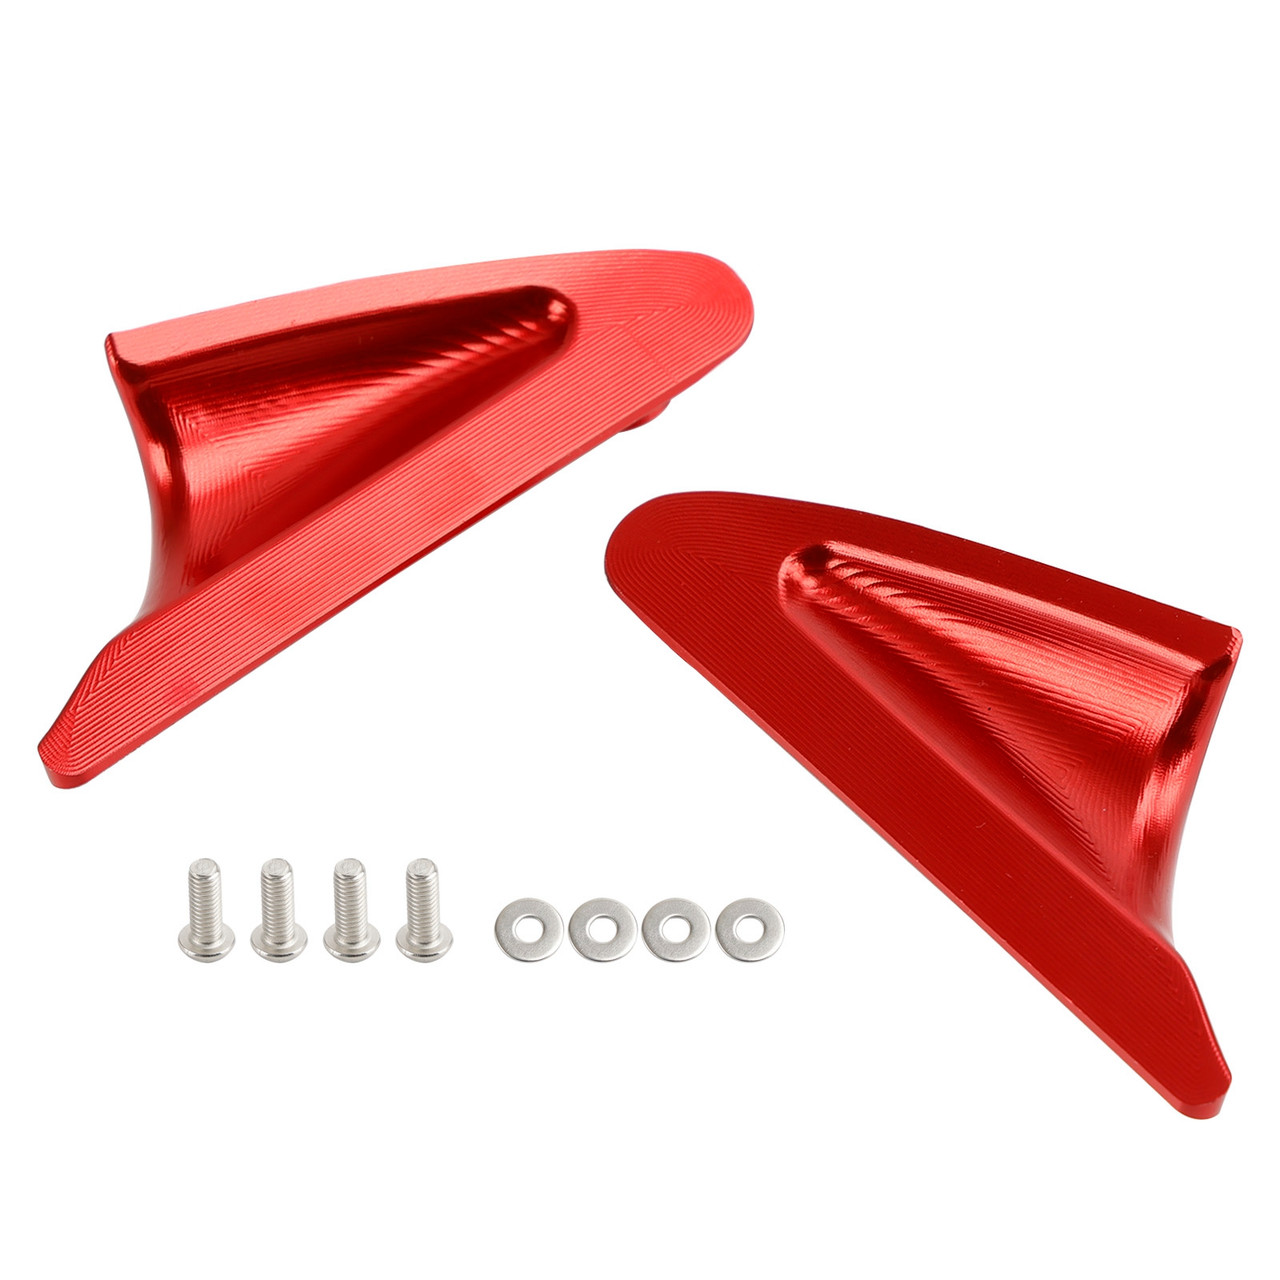 Red mirror delete blanking block off plates fits Ducati Panigale 1199 899 12-15